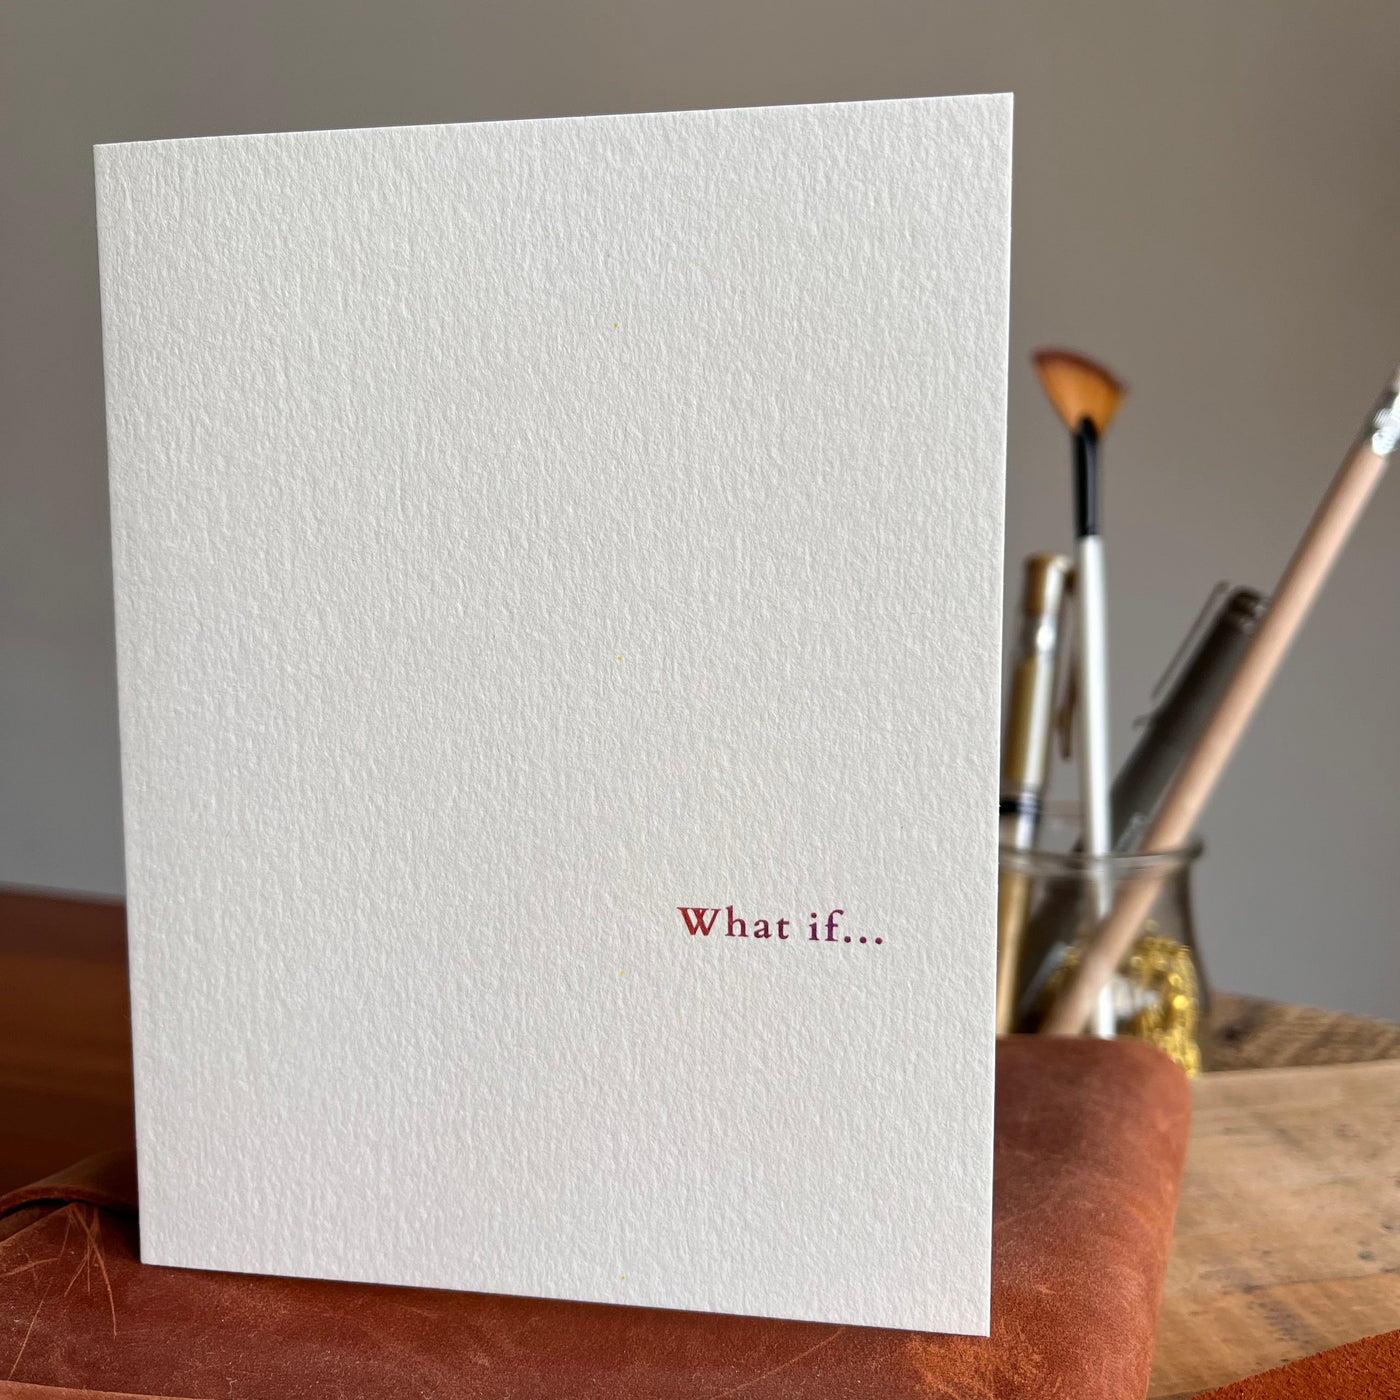 Beknown greeting card on leather notebook next to pencil holder. What if...